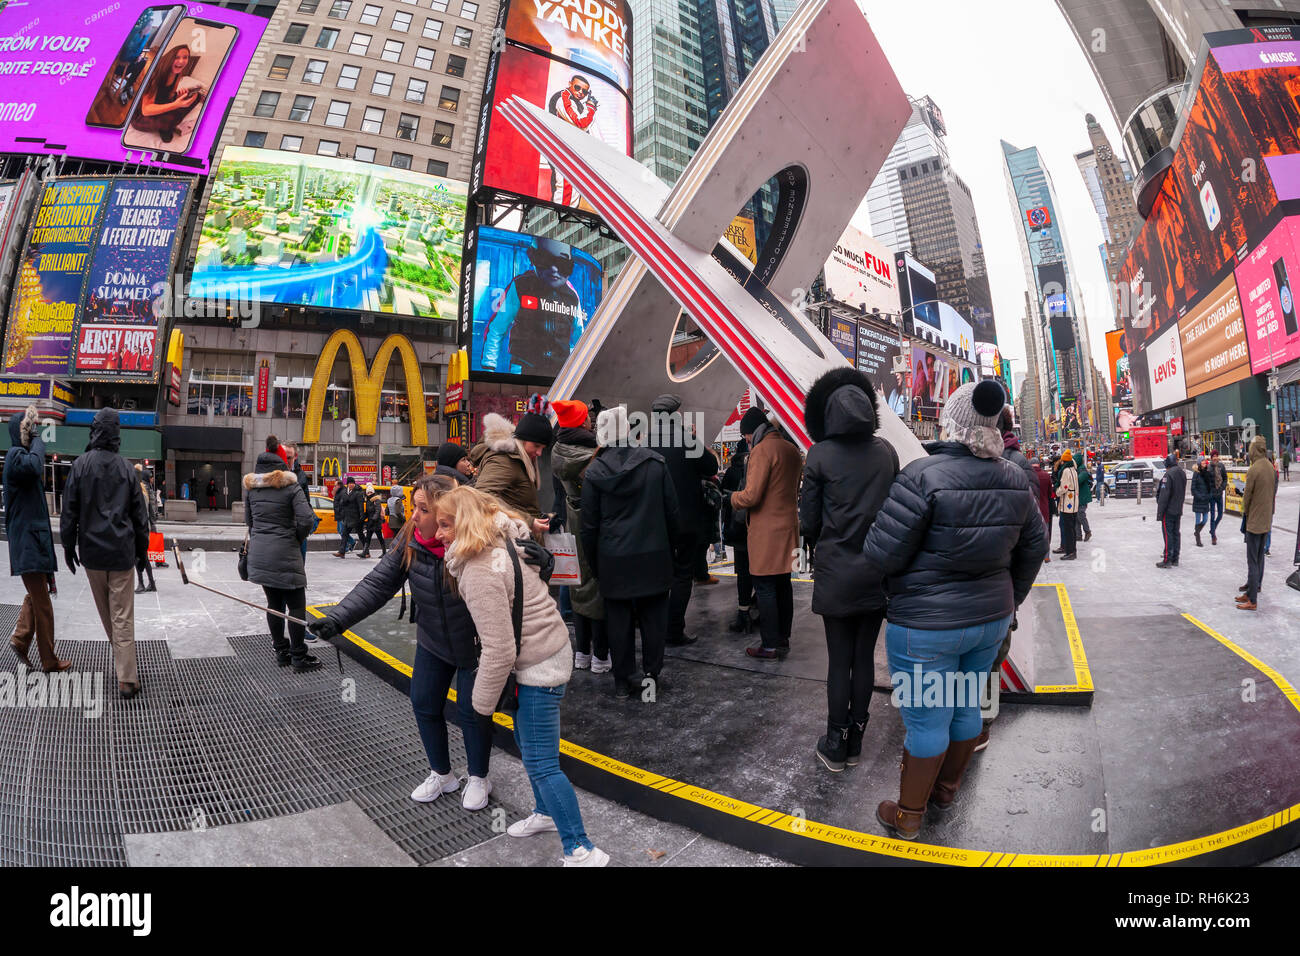 New York, USA. 1st Feb 2019. Tourists and the media crowd 'X', the winner of the Times Square Valentine Heart Design in Times Square in New York, at its unveiling on Friday, February 1, 2019. The sculpture, designed by Reddymade, uses two intersecting aluminum planes with a cylinder shape cut at the intersection that viewed from below forms a heart shape. Additionally, the X symbol has represented kisses and expressions of love since the 19th century. 'X' will on view through February.  (© Richard B. Levine) Credit: Richard Levine/Alamy Live News Stock Photo